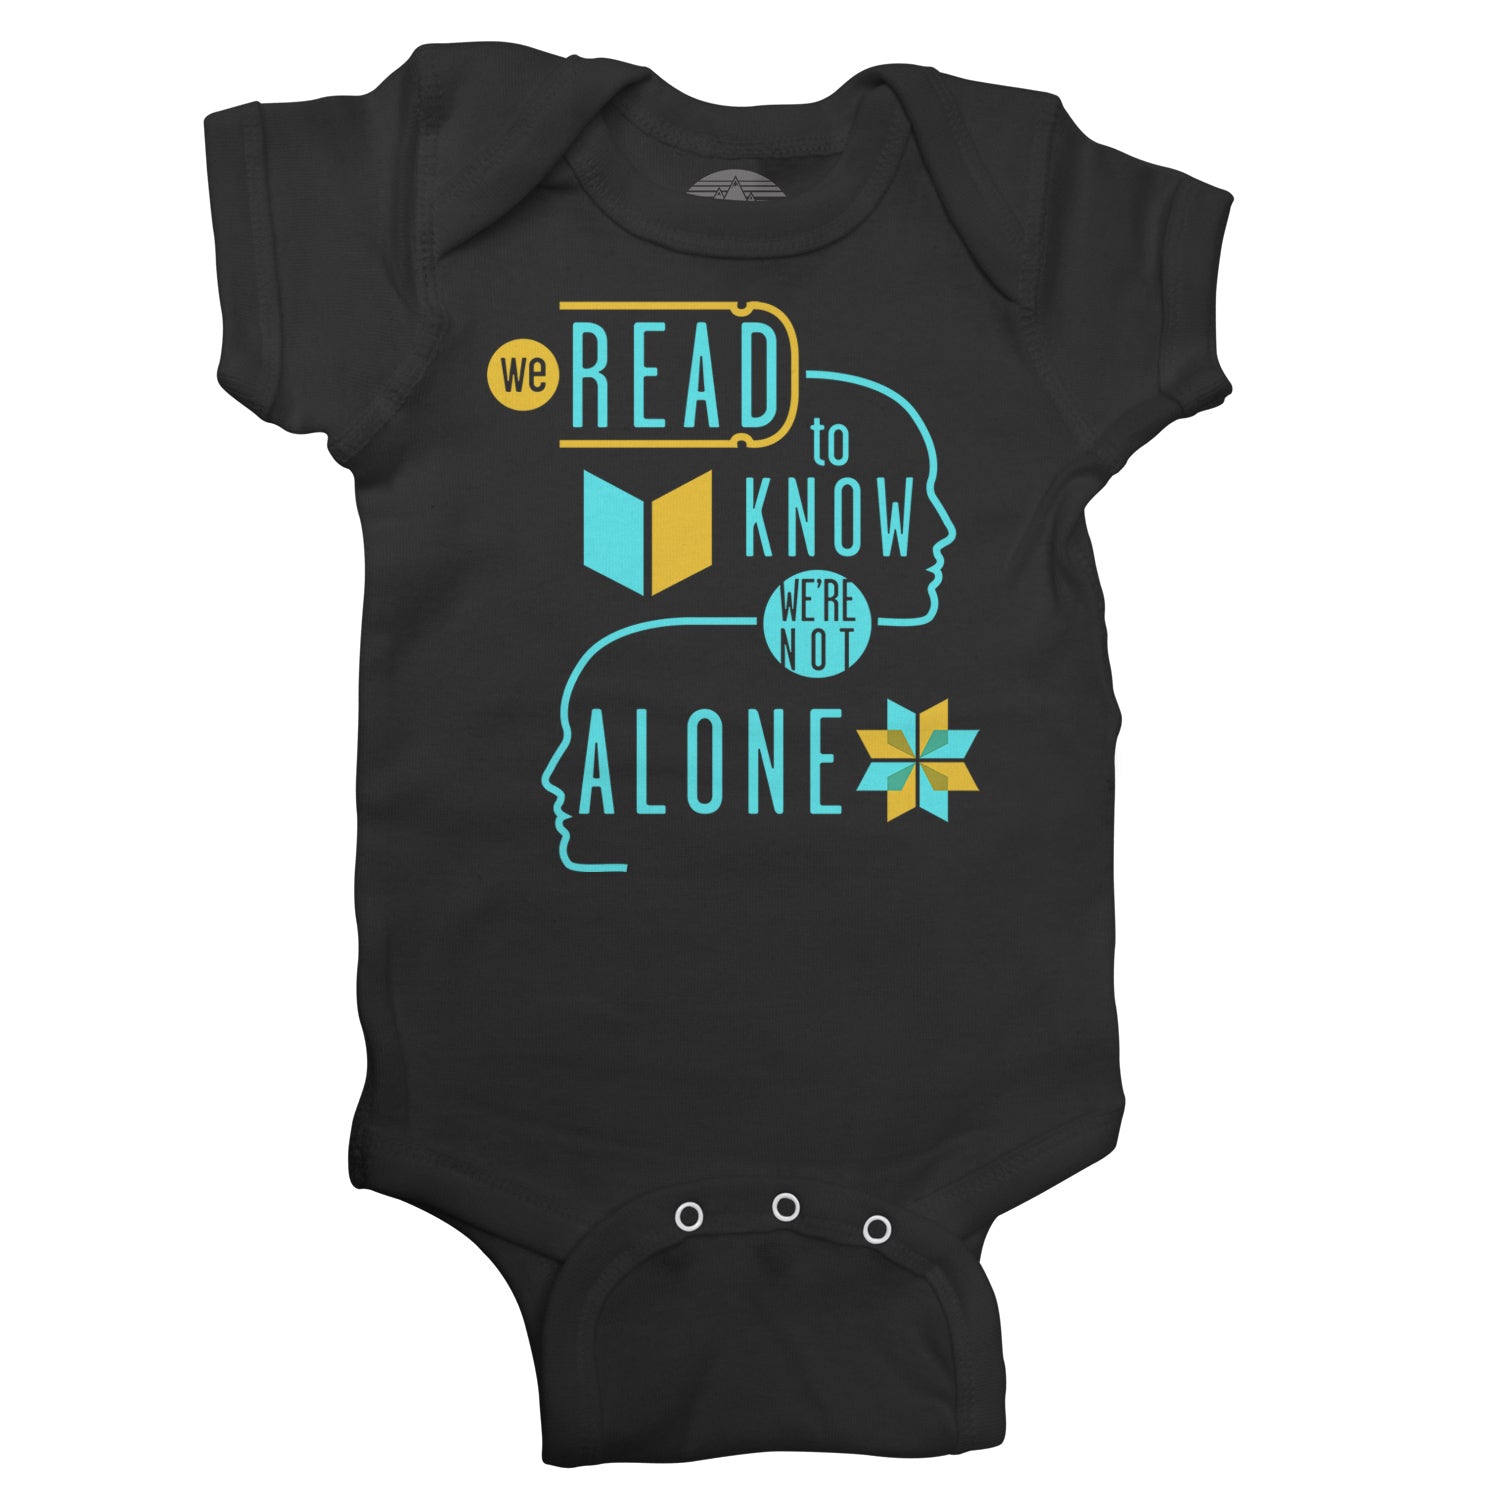 We Read to Know We are Not Alone Infant Bodysuit - Unisex Fit